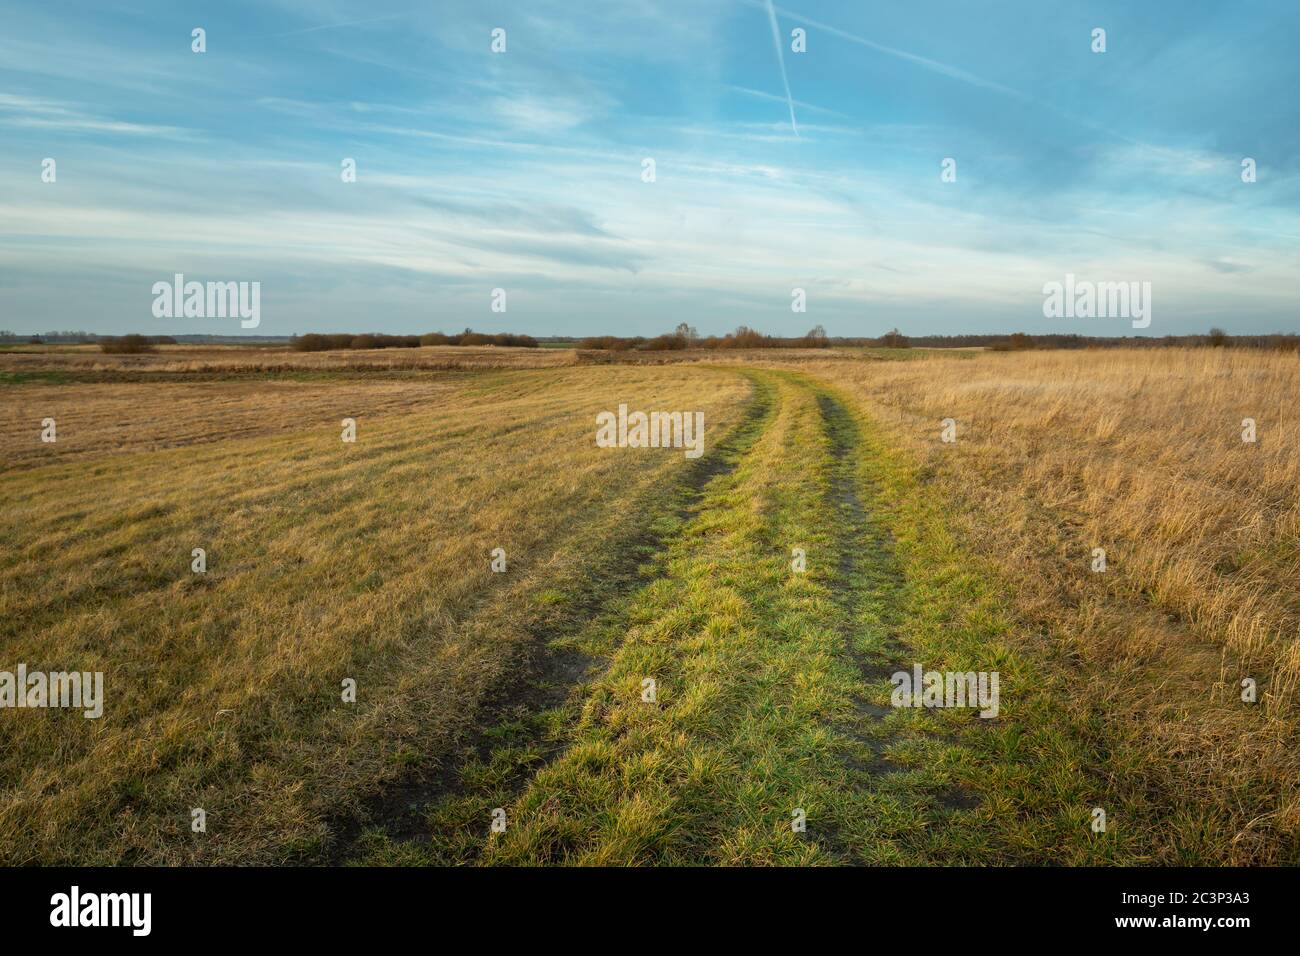 A grassy road, meadows with dry grasses and evening blue sky Stock Photo